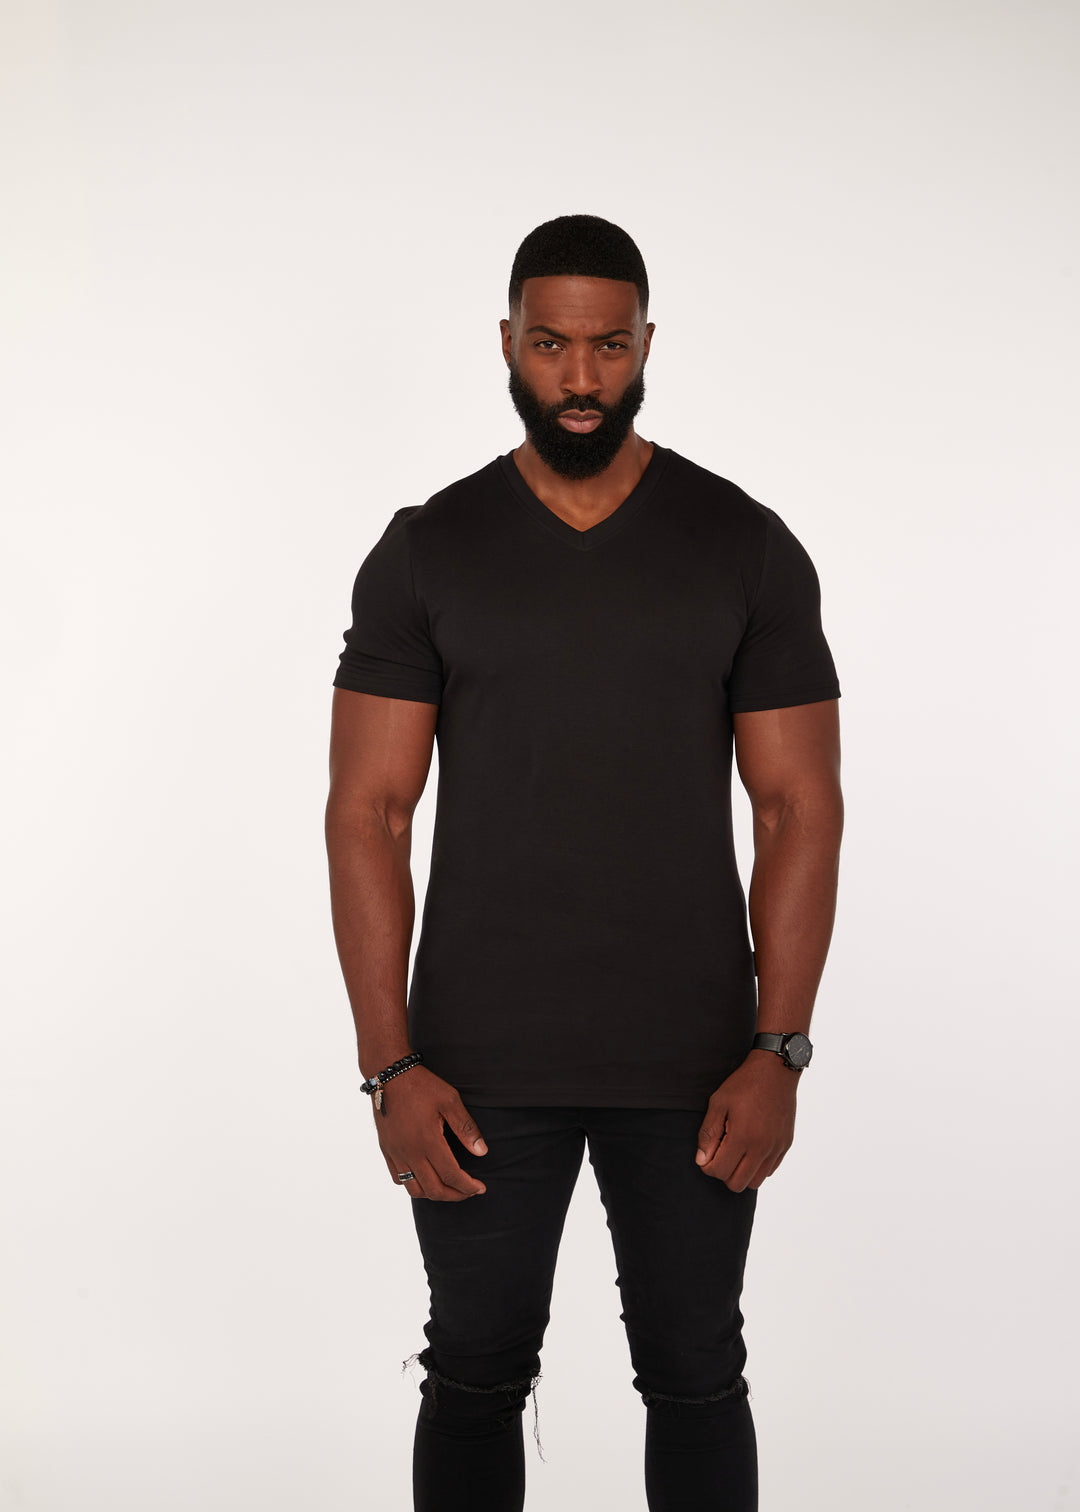 Mens Black Tapered Fit V-Neck T-Shirt in Short Sleeve. A Proportionally Fitted and Muscle Fit V Neck. The best v neck t-shirt for muscular guys.